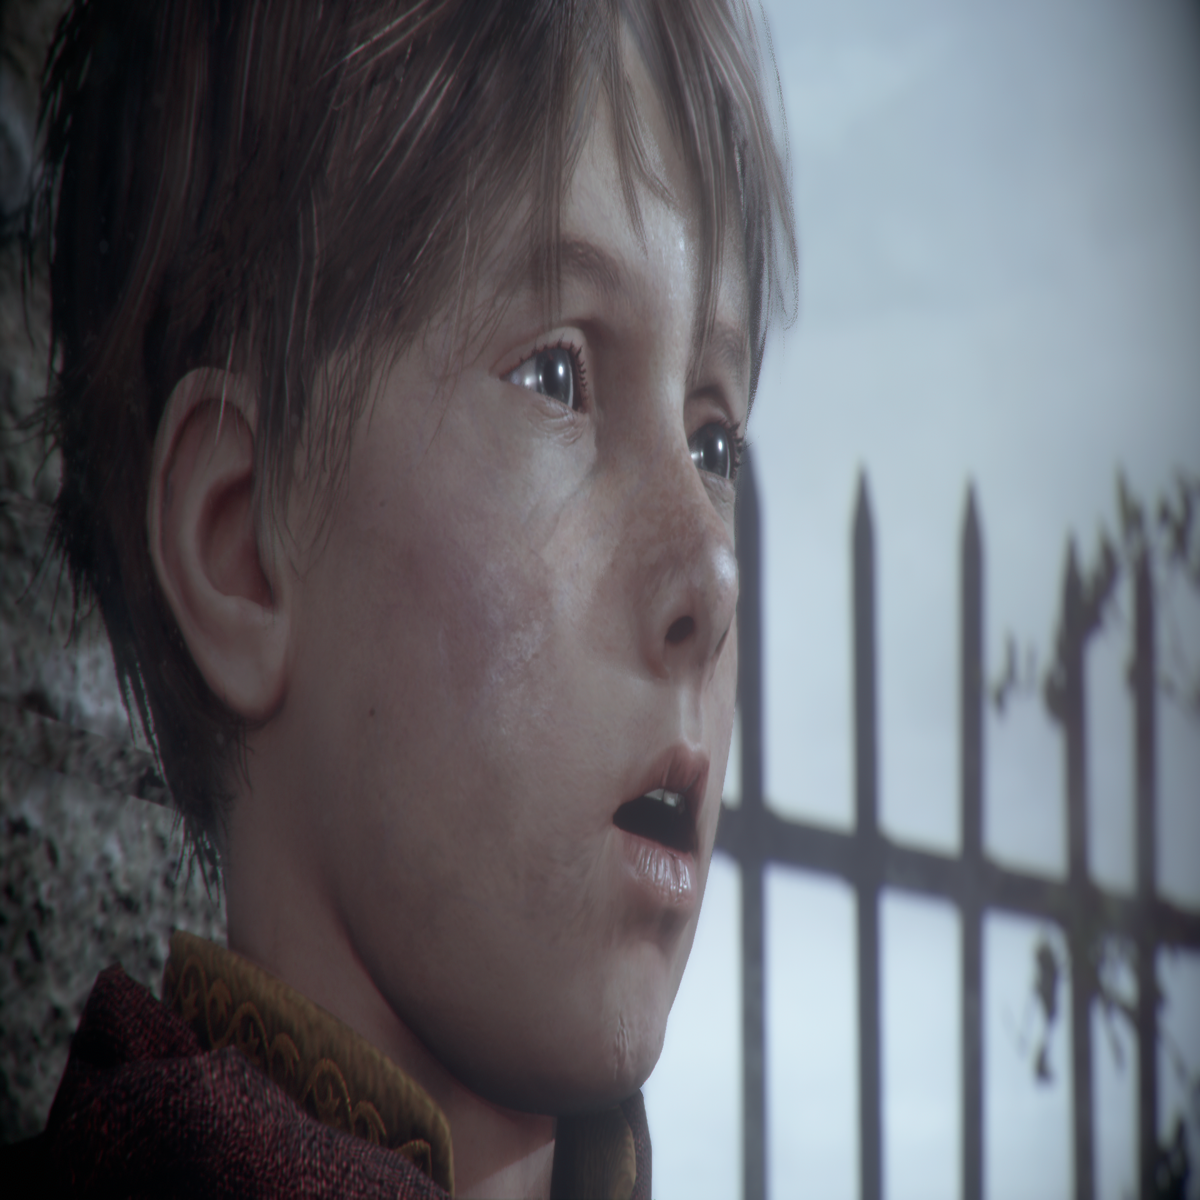 Metacritic - A PLAGUE TALE: INNOCENCE reviews are coming